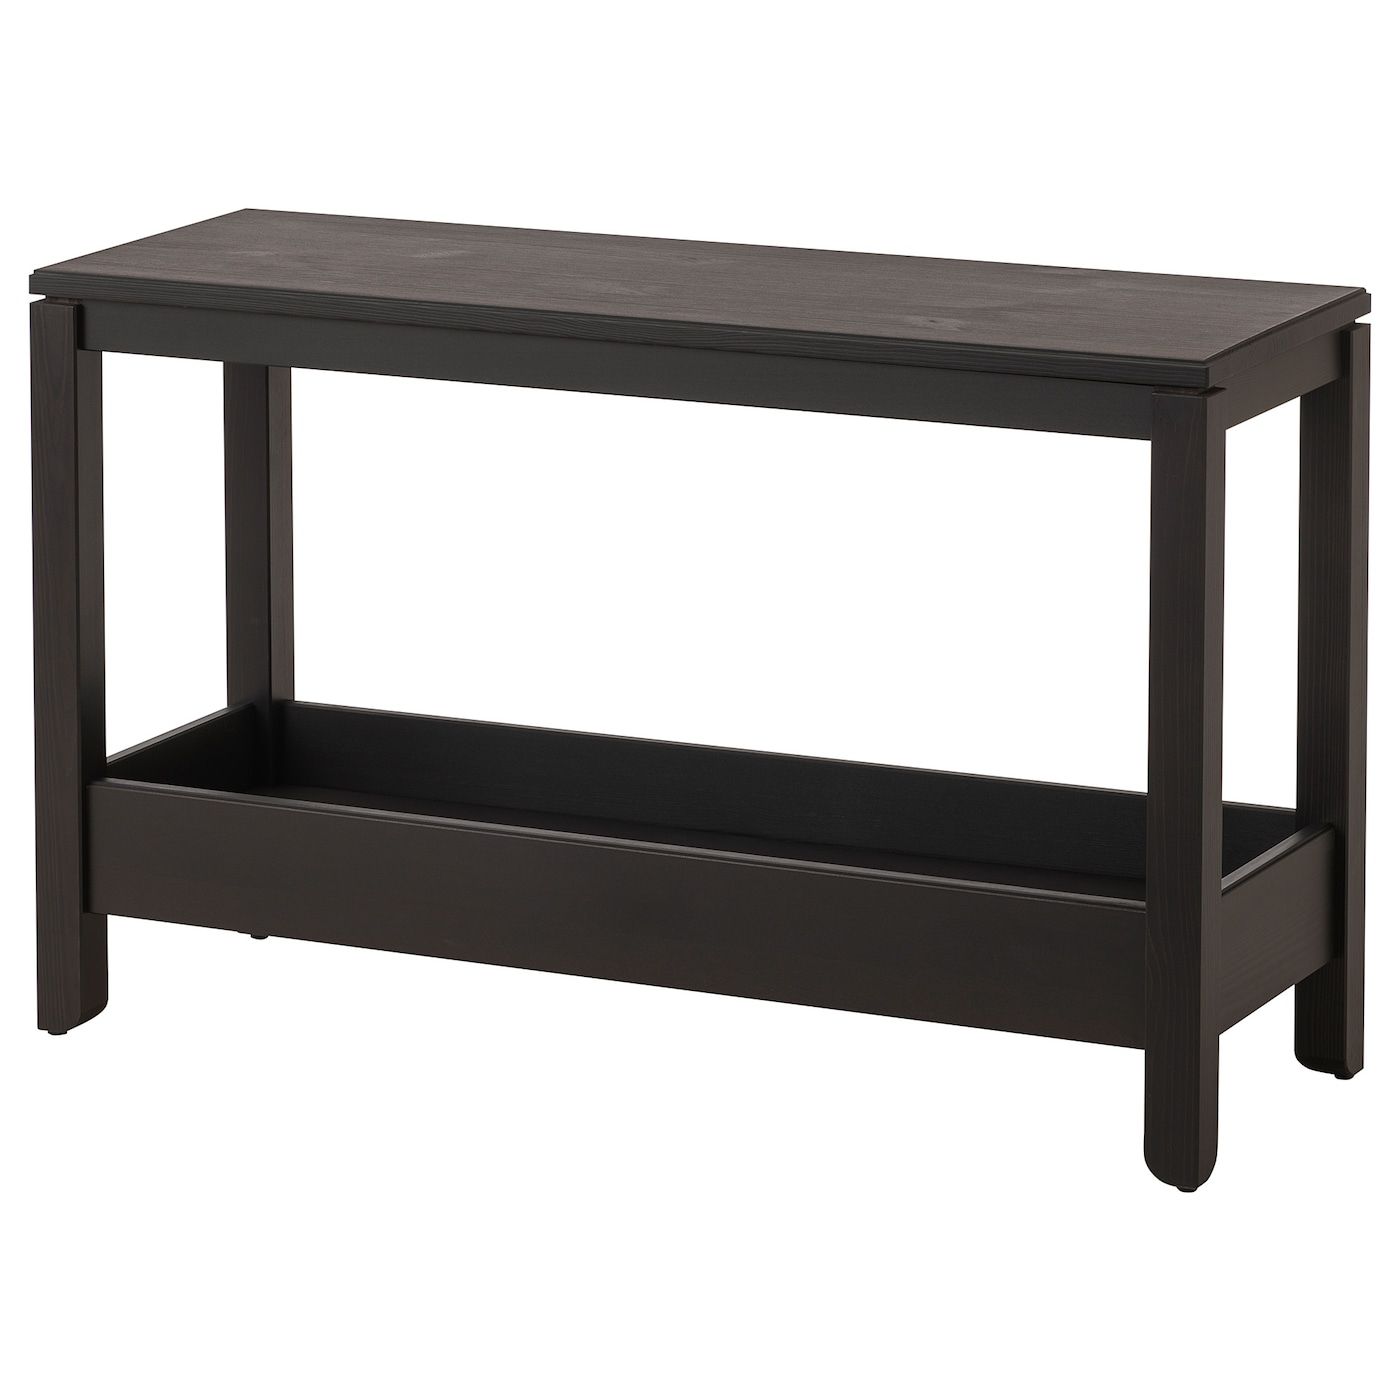 Havsta Console Table – Dark Brown – Ikea With Regard To Dark Brown Console Tables (View 19 of 20)